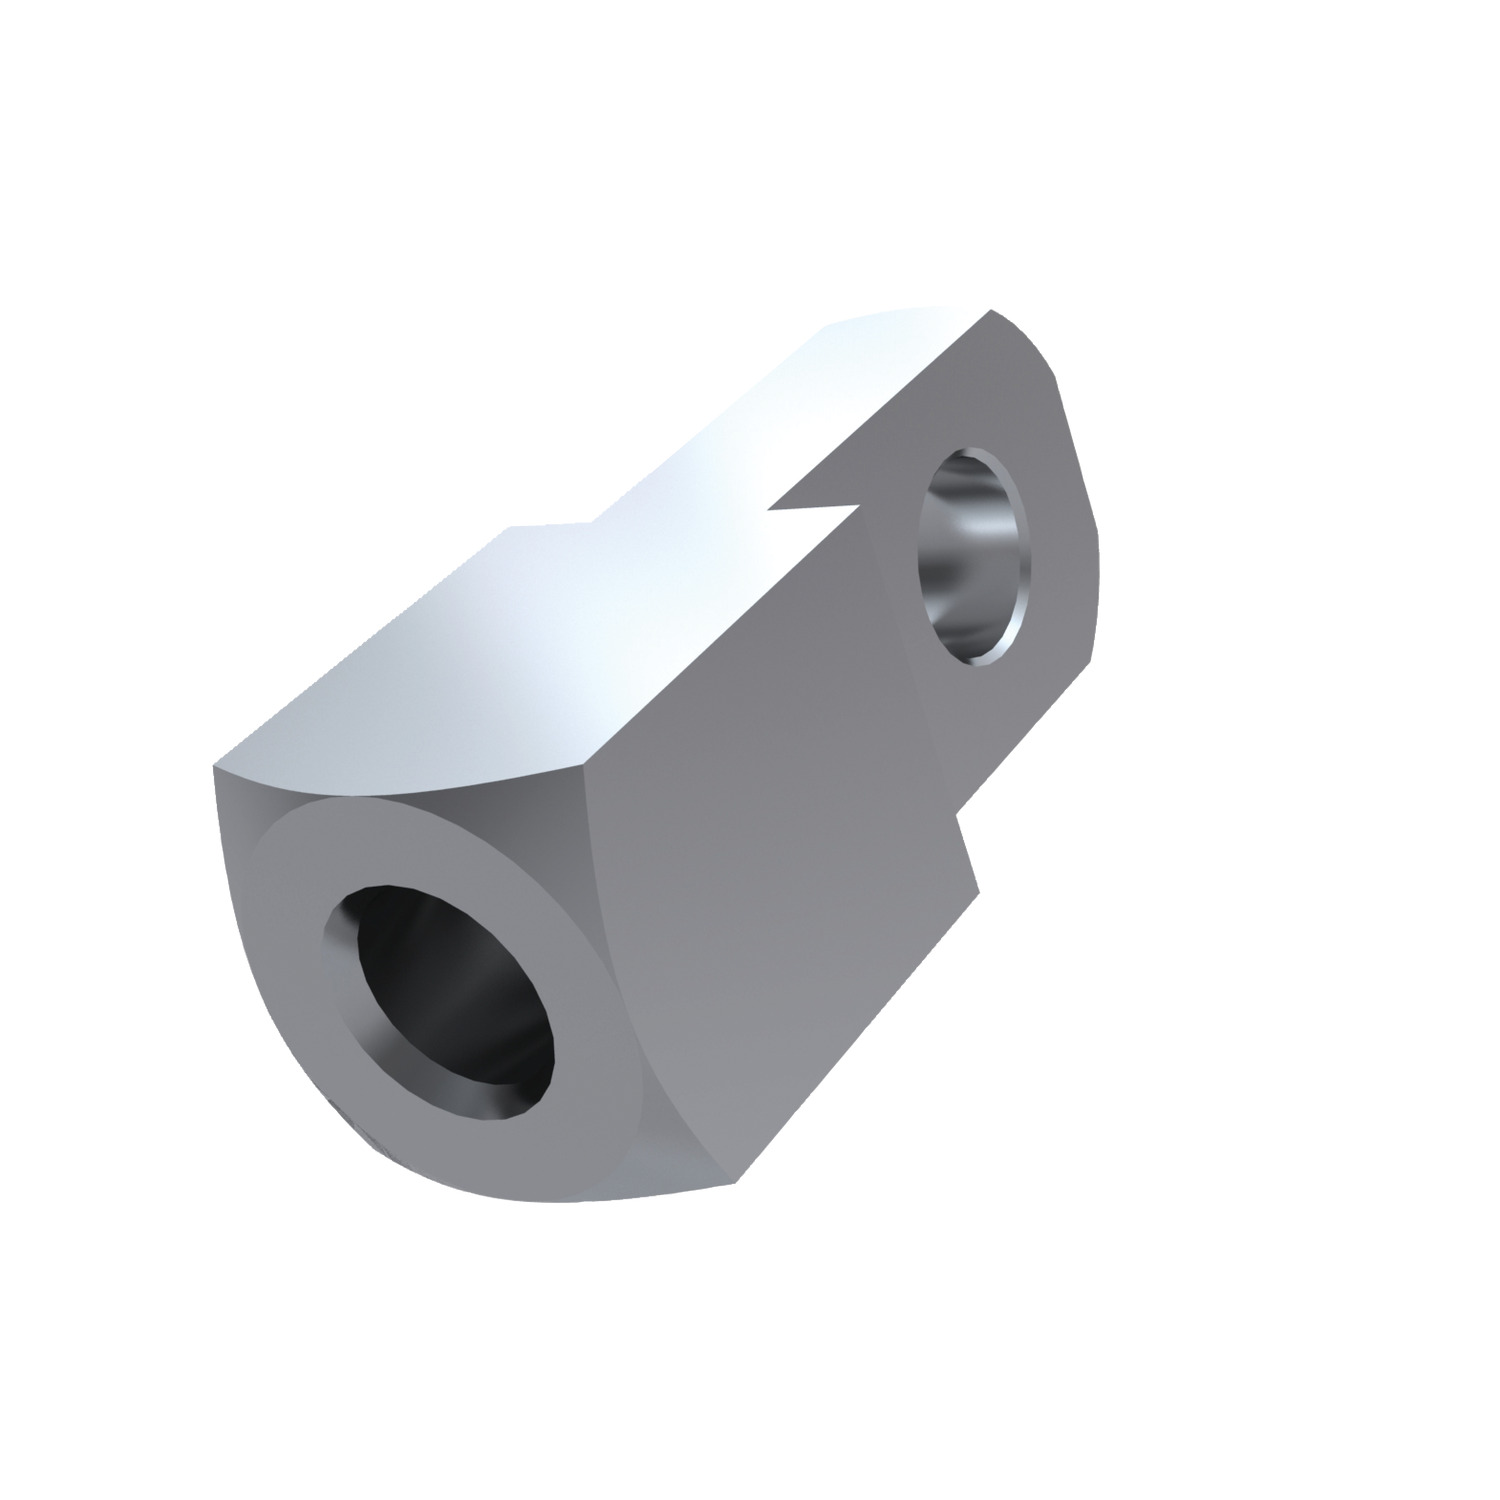 R3421 - Mating Piece for Clevis Joints